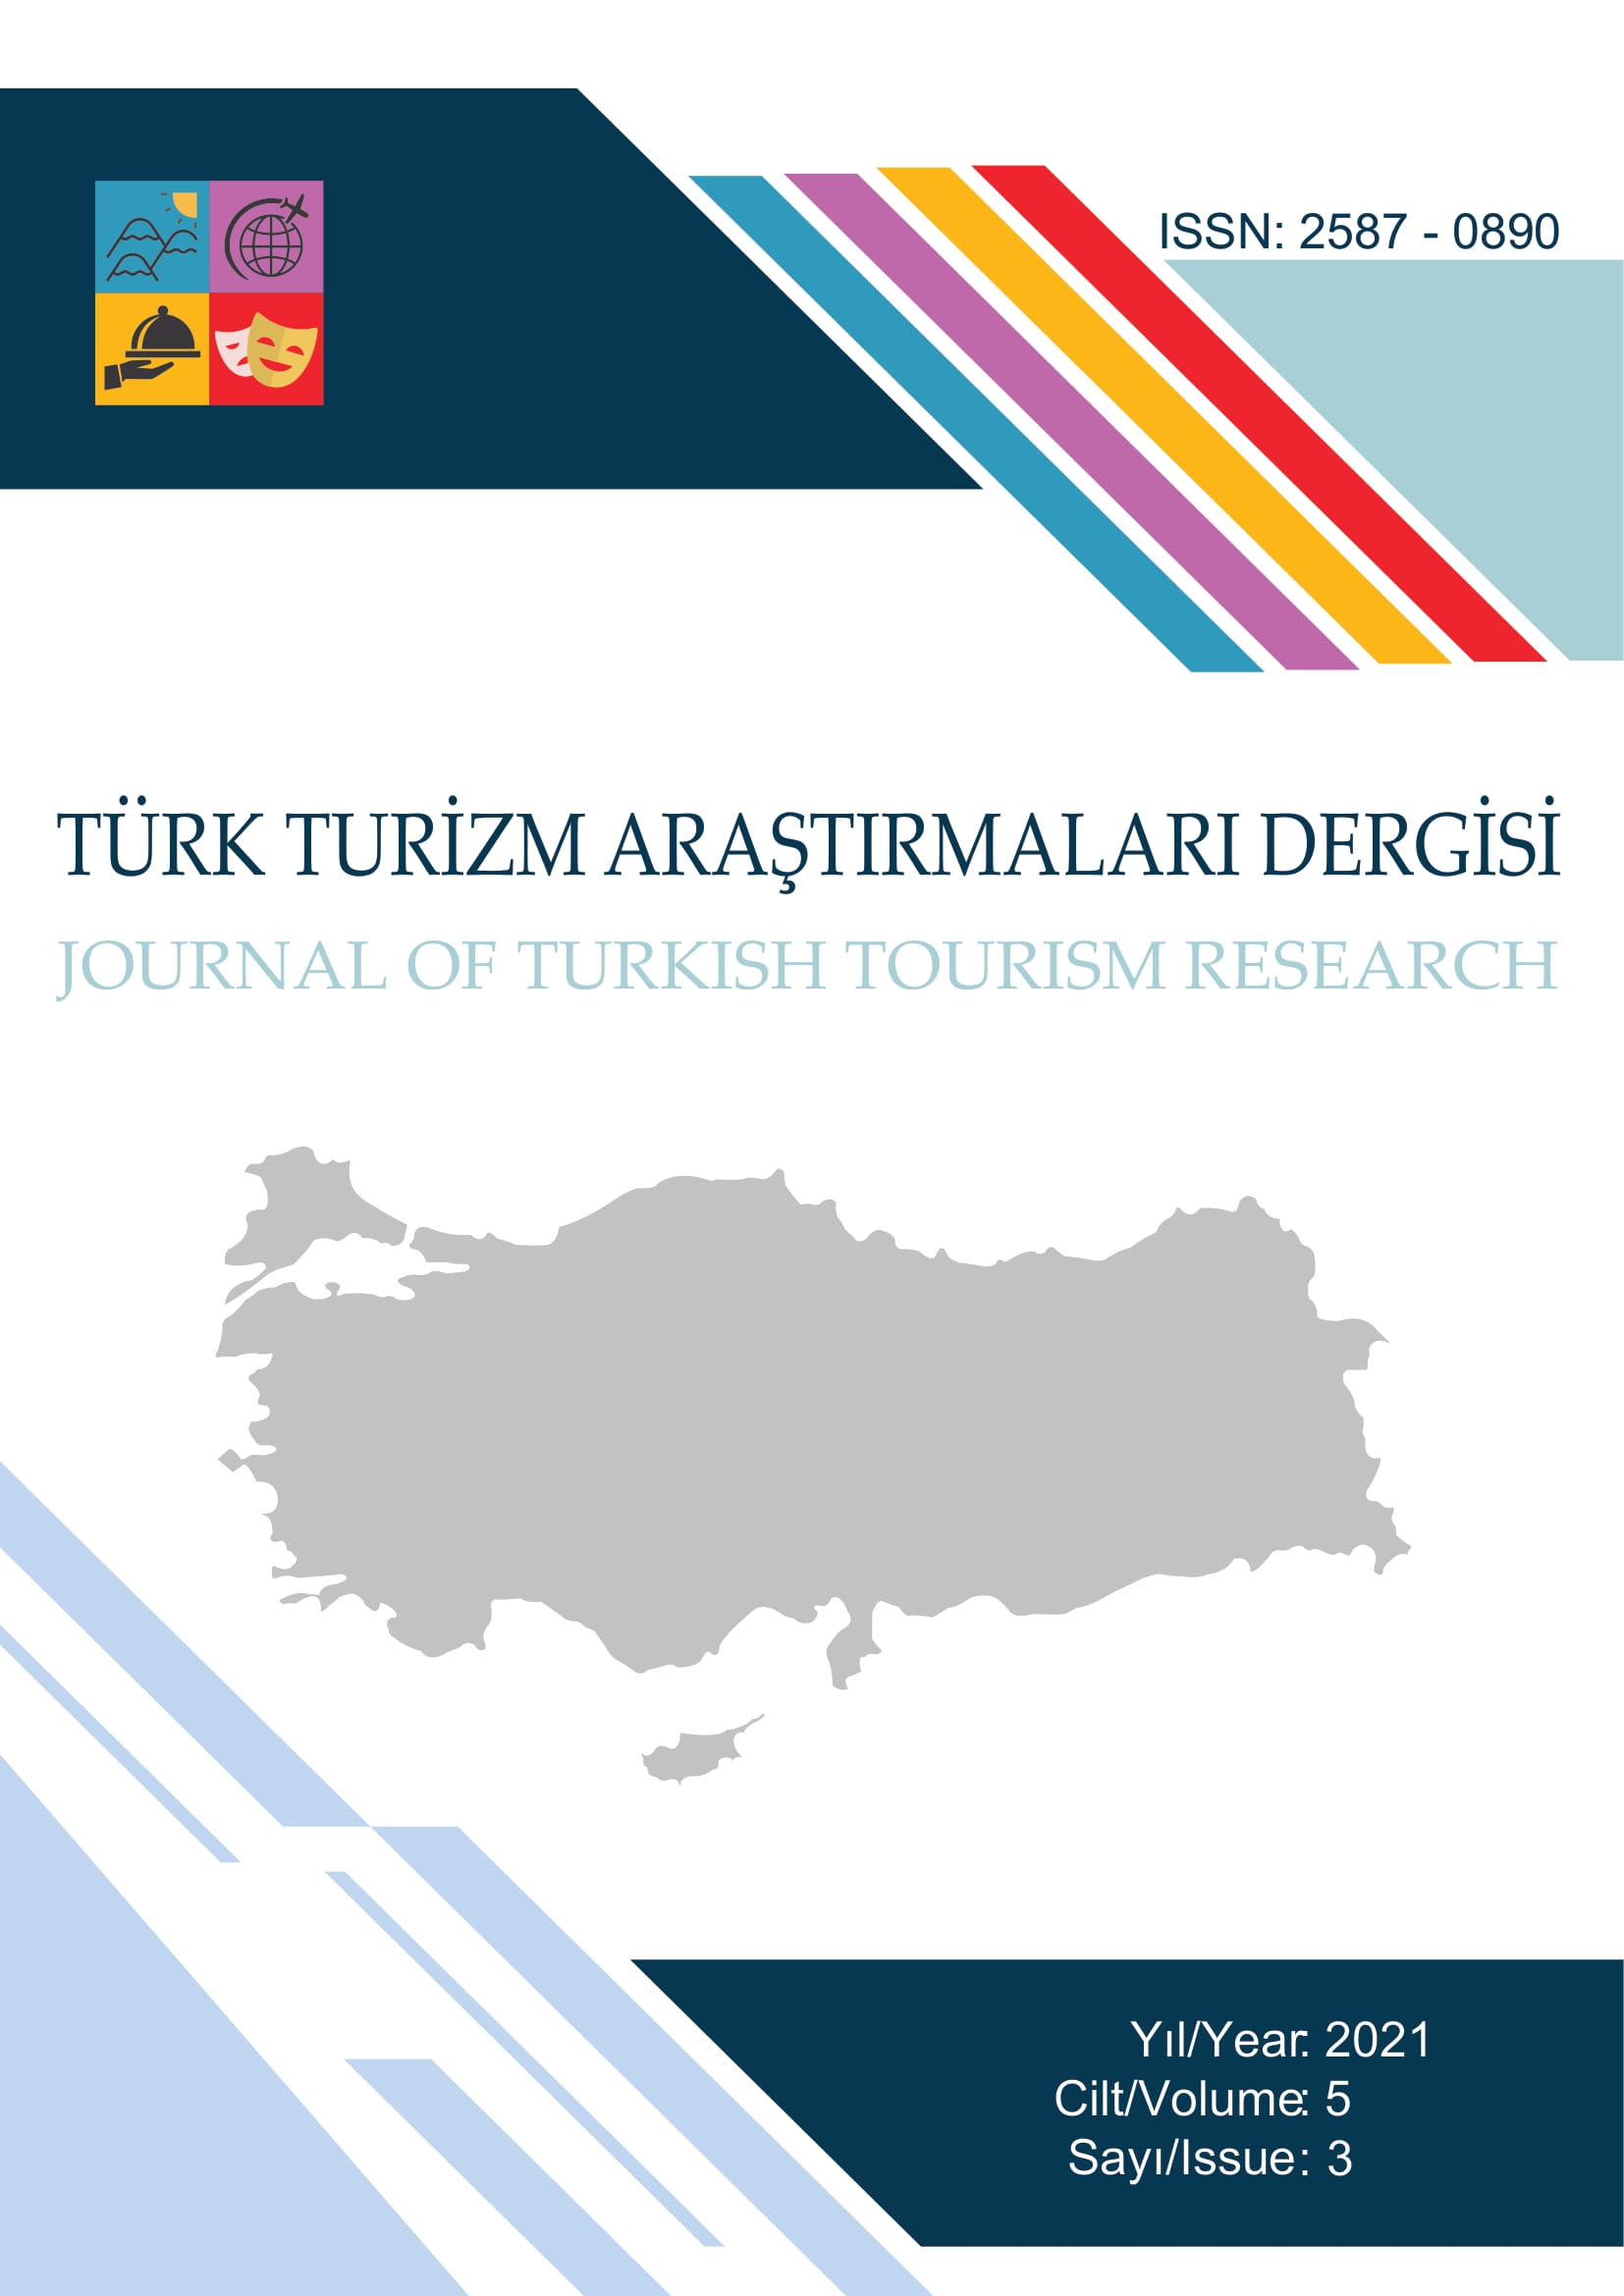 Local Food Purchase Behavior of Tourists in The Context of Gastronomy Tourism: The Case of Hatay Cover Image